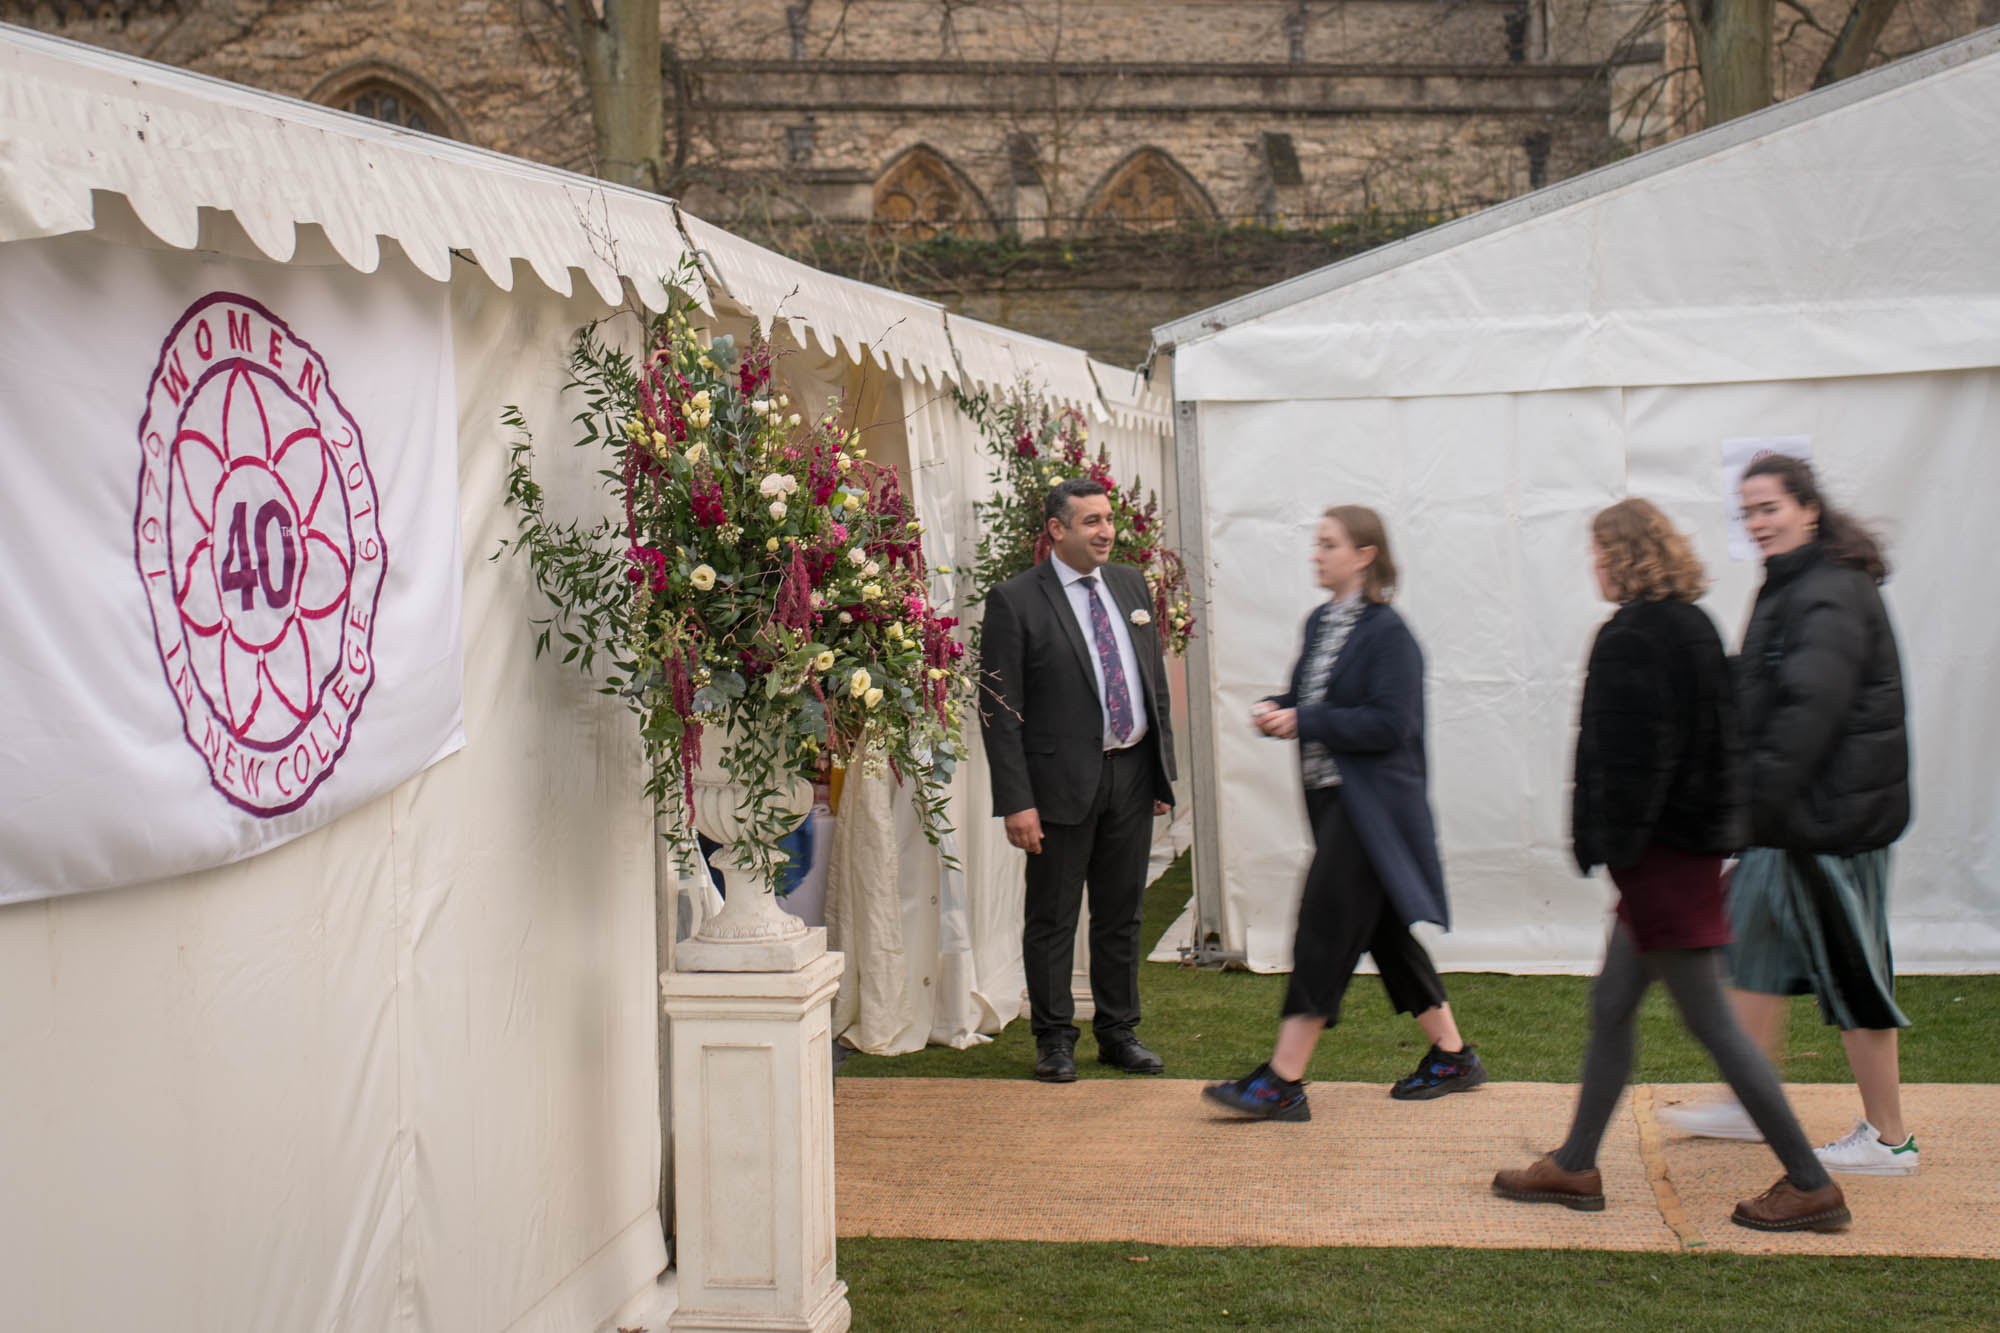 Attendees enter the marquee in the Gardens